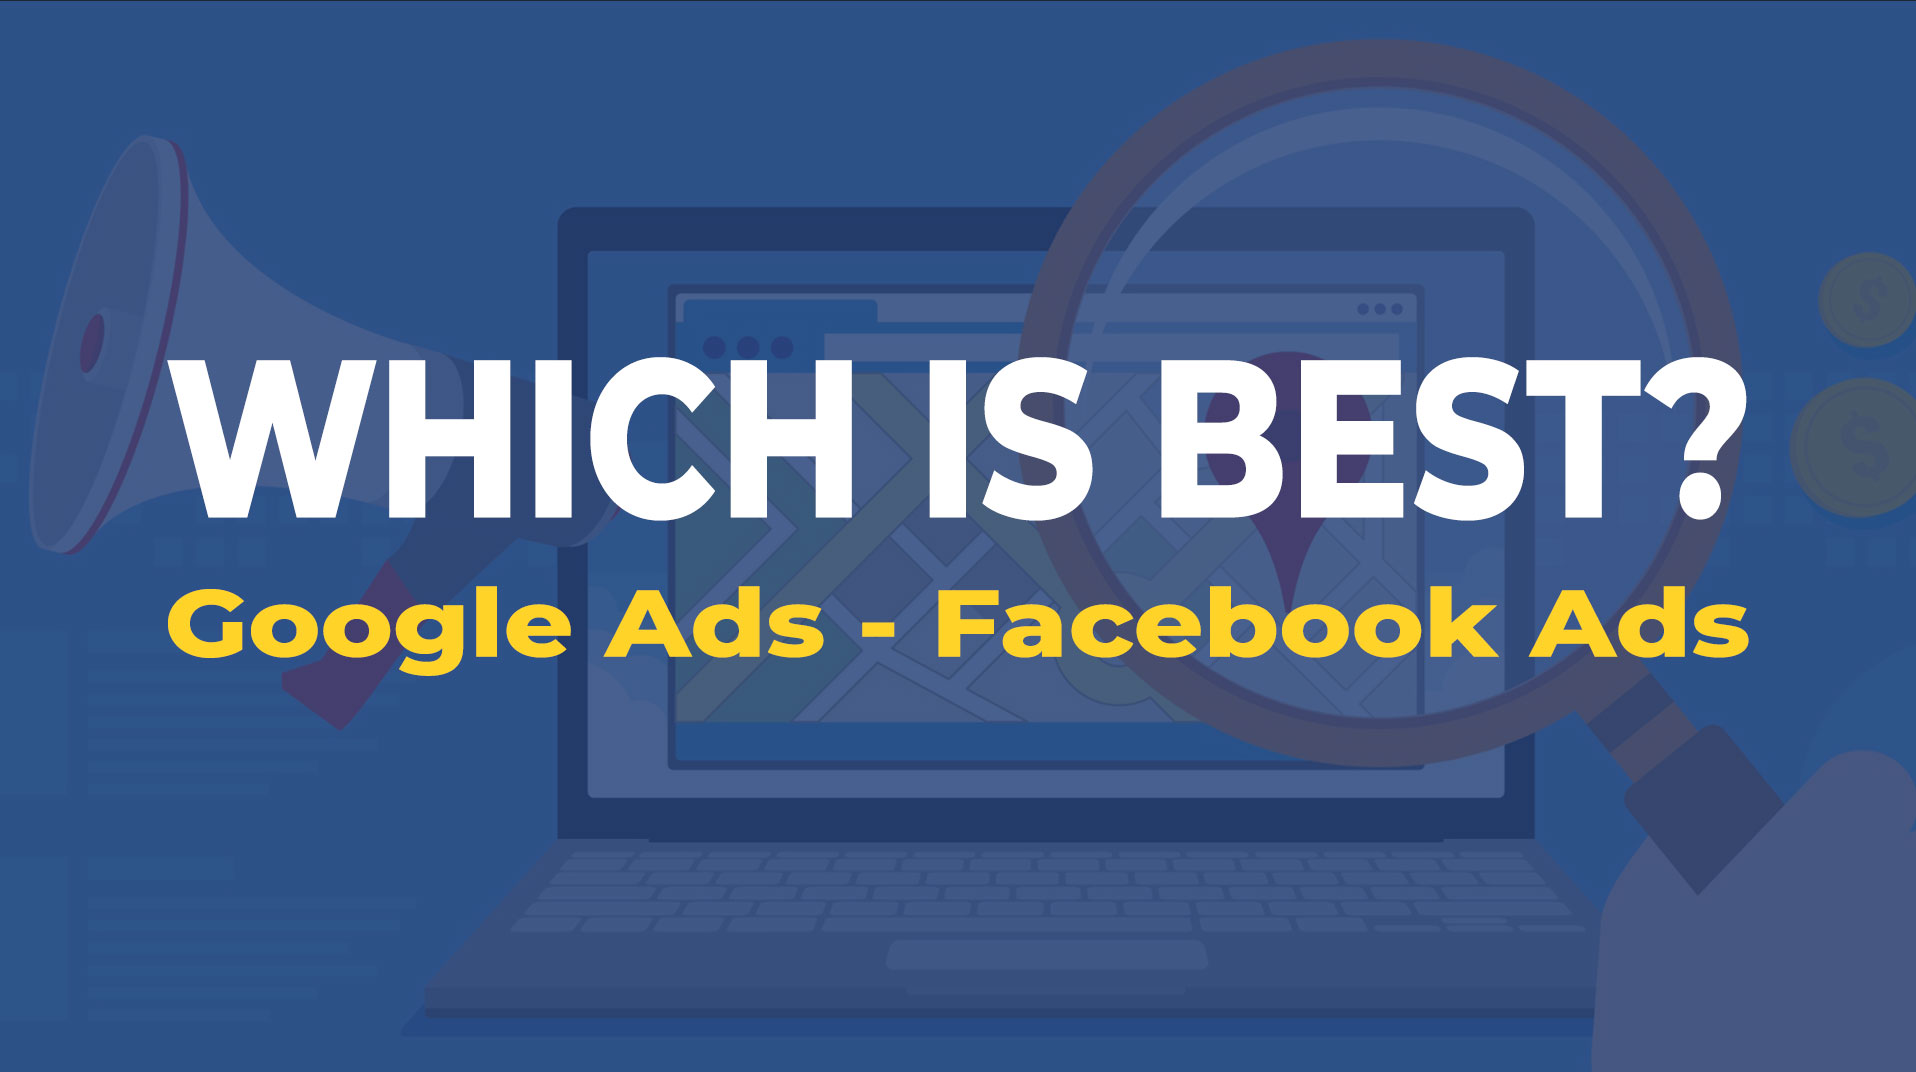 Google Ads vs. Facebook Ads: Which is Best for Home Service Business